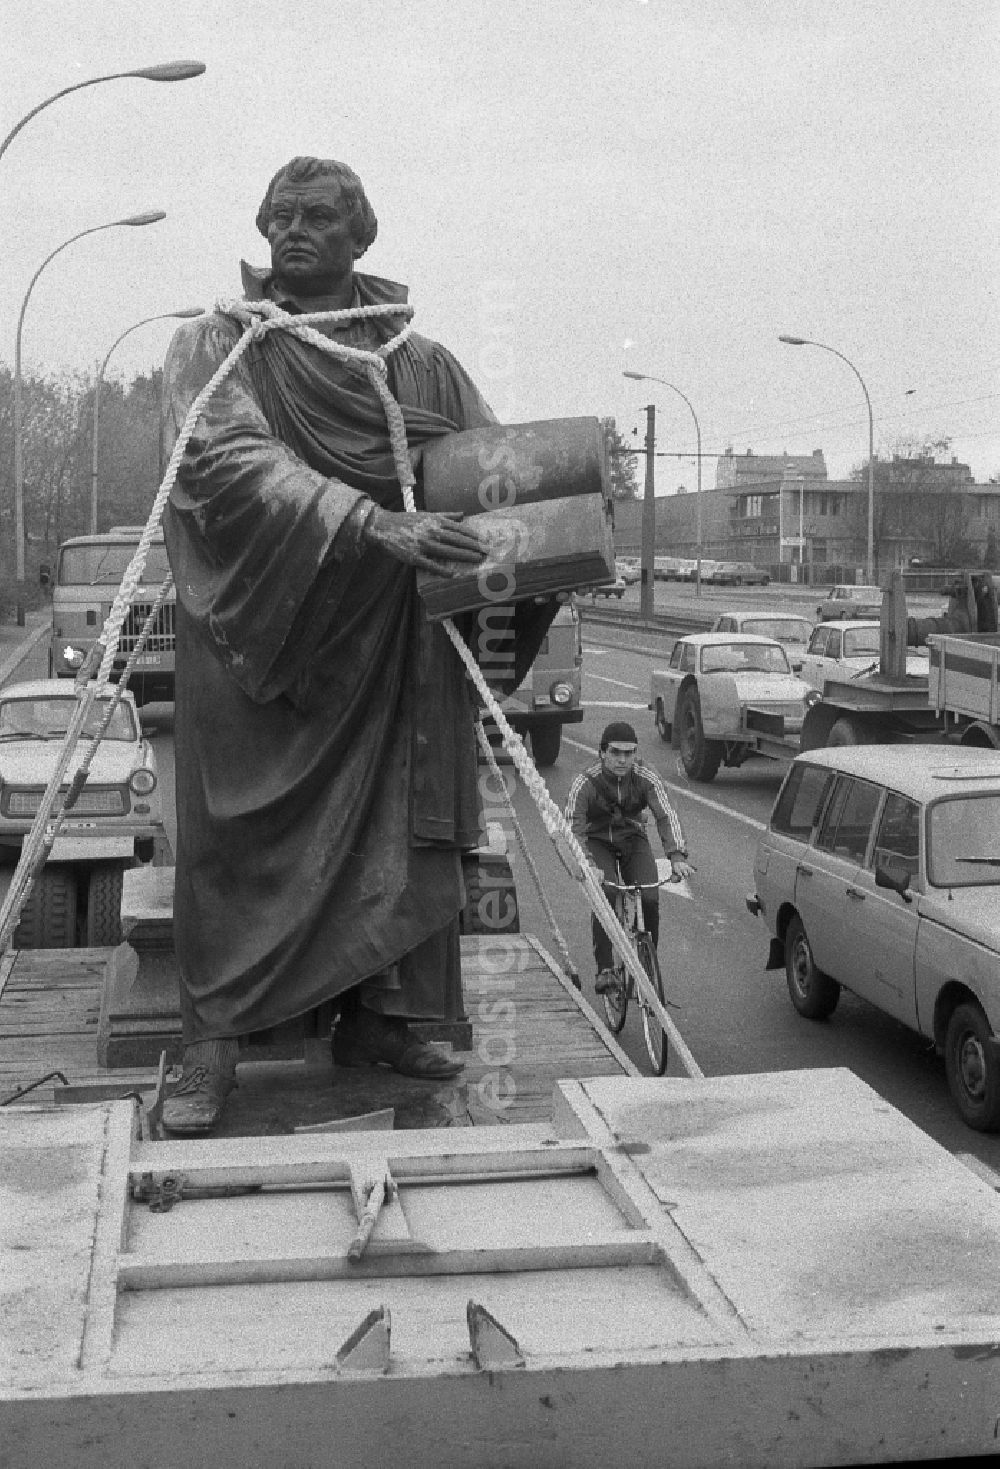 GDR image archive: Berlin - Sculpture of the Martin Luther Monument during the re-erection on Karl-Liebknecht-Strasse in the Mitte district of East Berlin in the area of the former GDR, German Democratic Republic